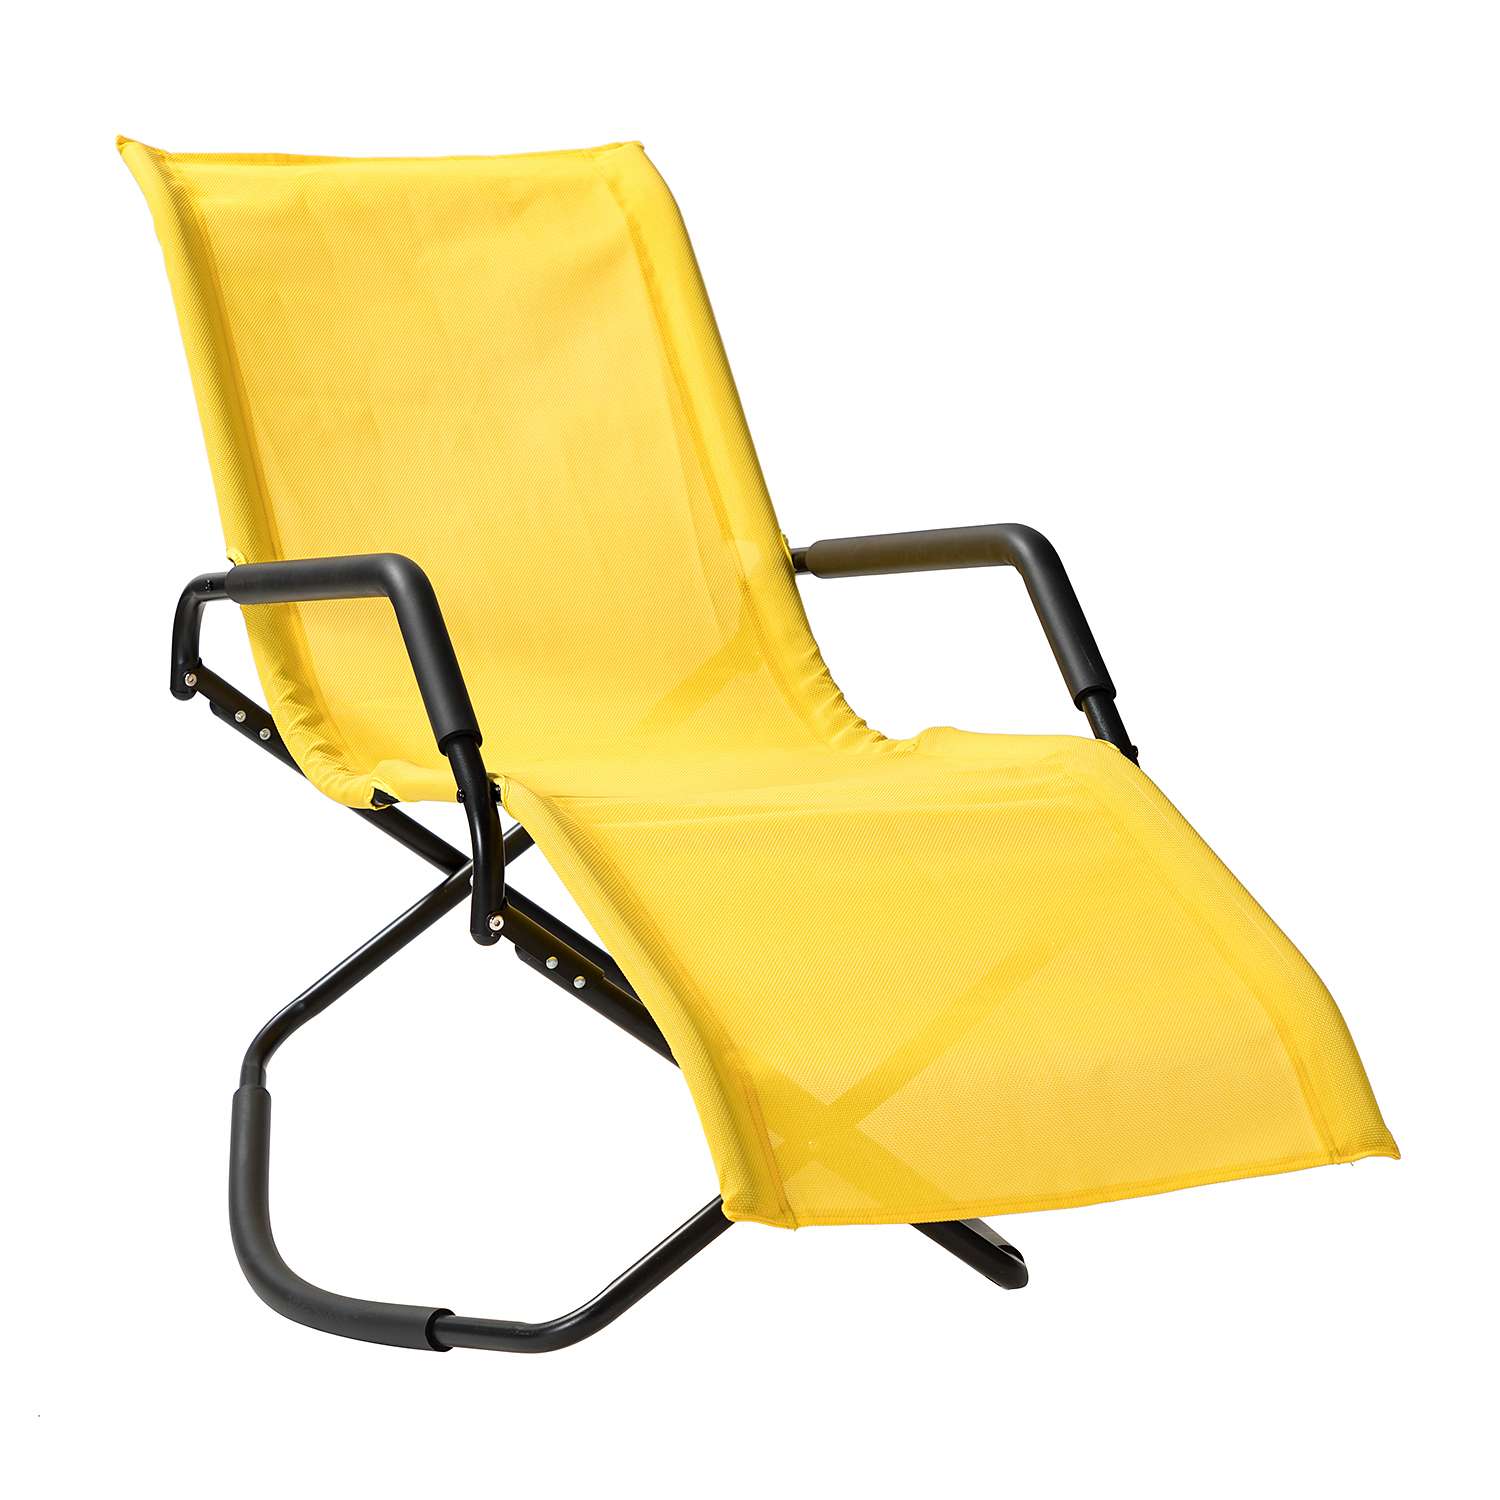 Camping Rocking Chair, Outdoor Folding Lounge Chaise Chair, Portable Beach Chair with Armrests, Folding Lounge Chair, Patio Reclining Lounge Chair for Pool, Garden, Lawn, Deck, D7841 - image 2 of 9